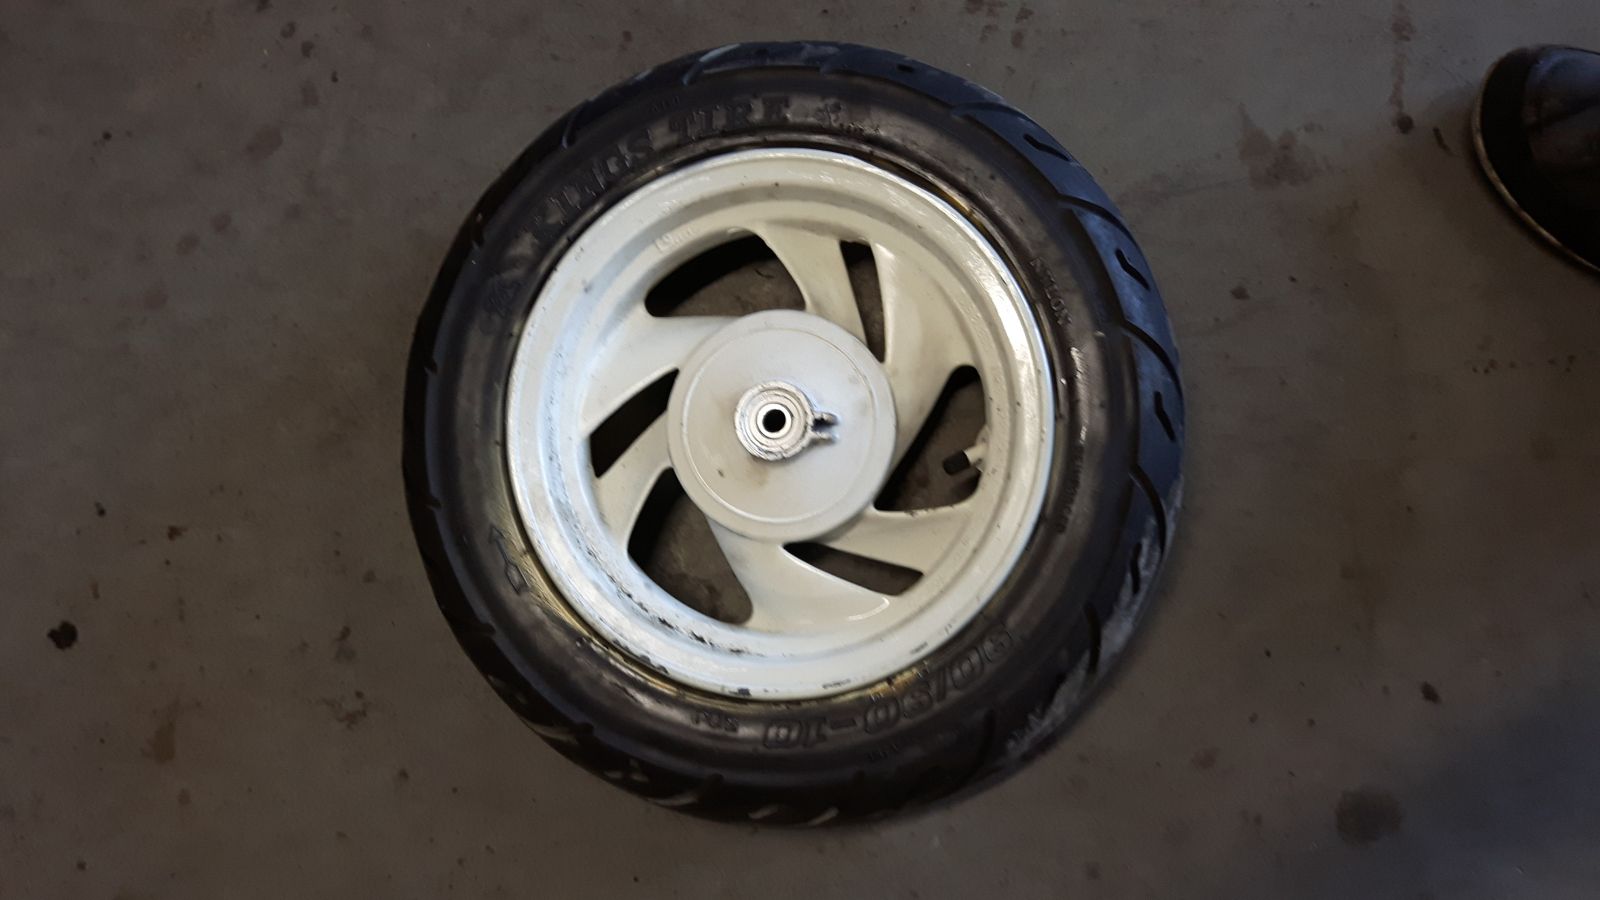  Peugeot Zenith front wheel and tire